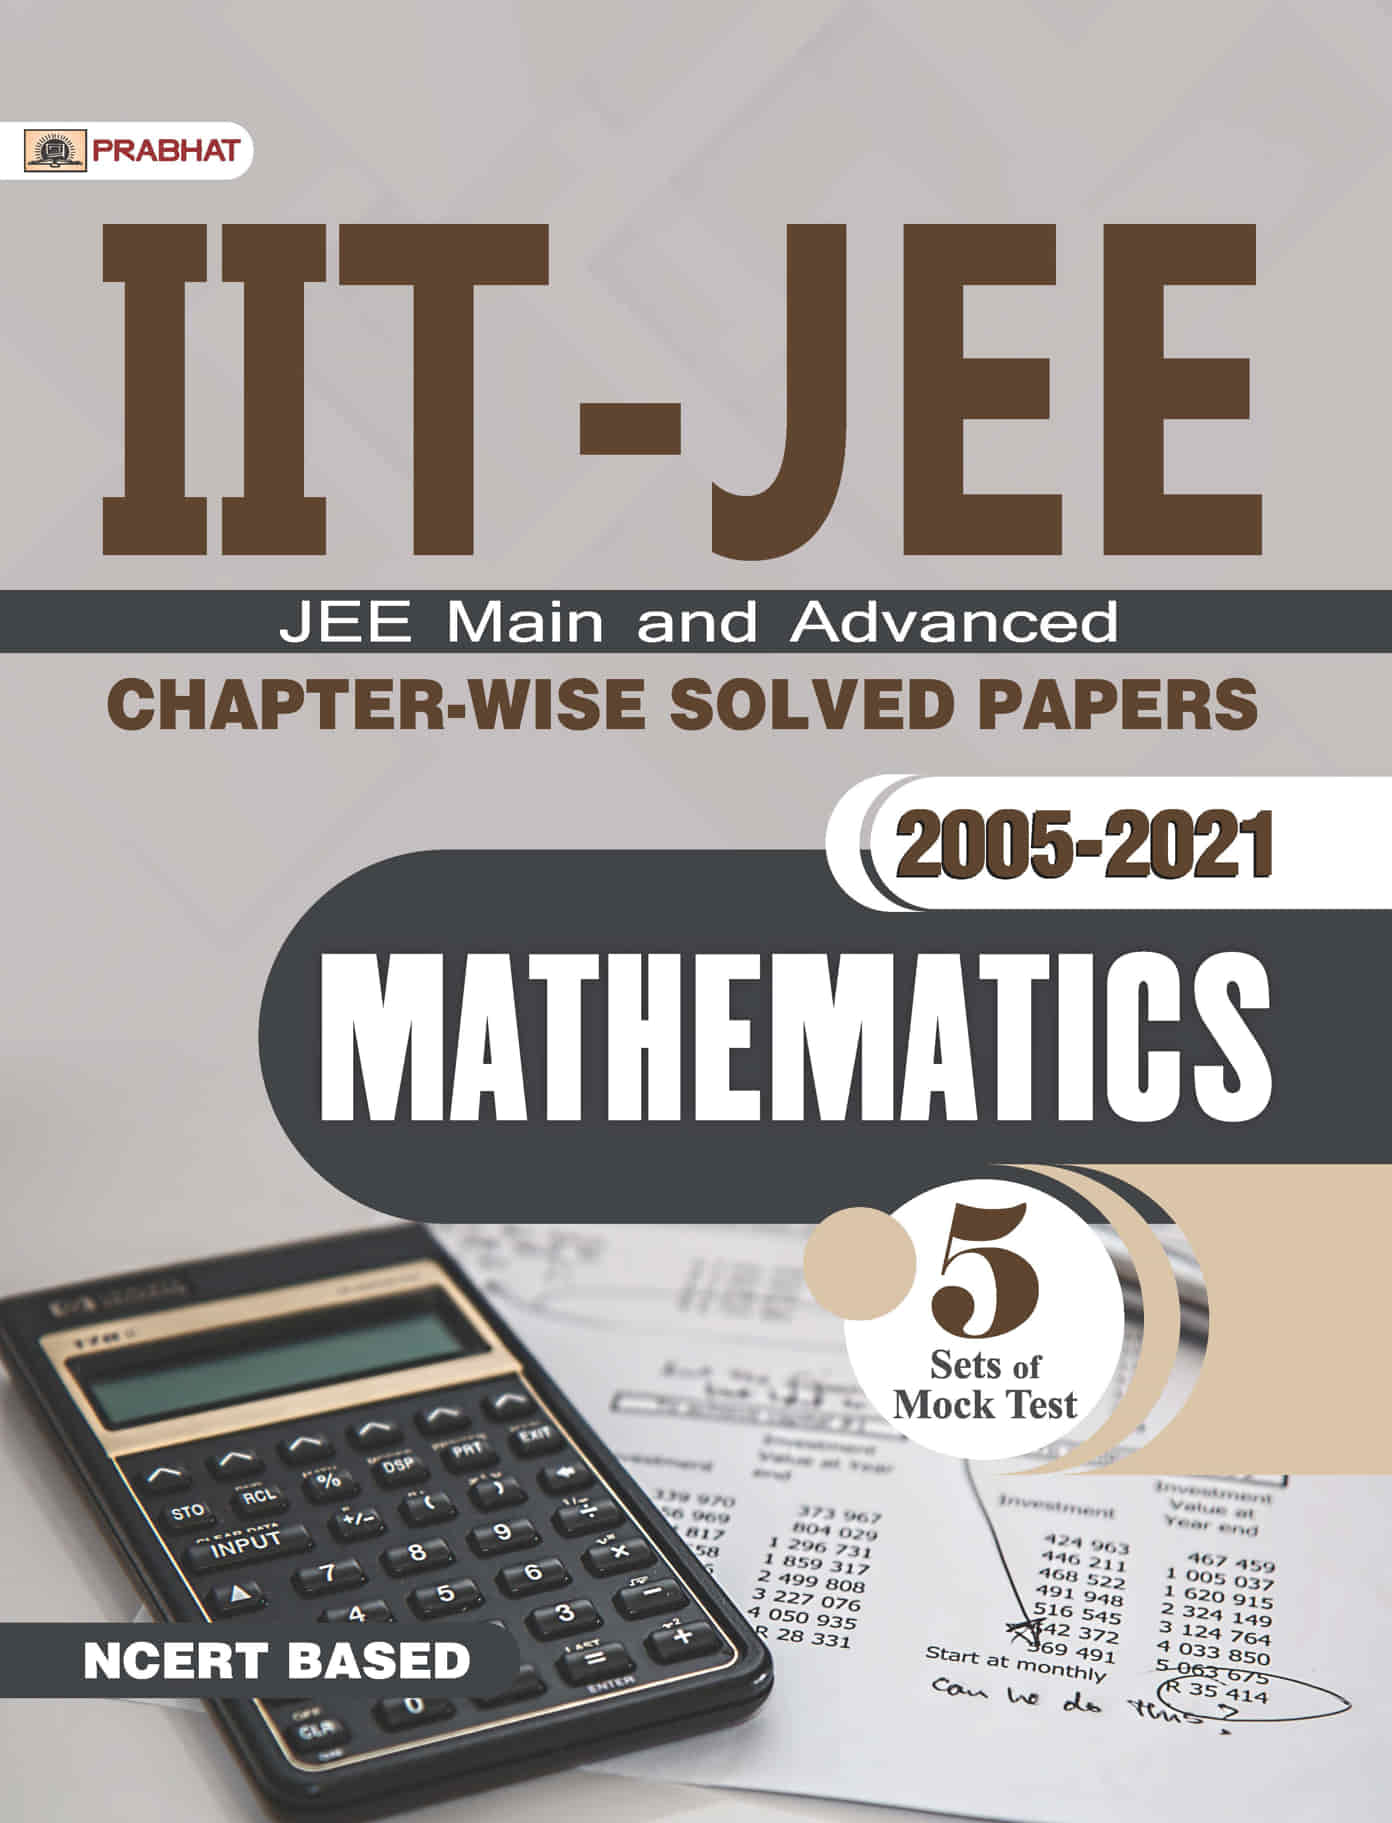 IIT-JEE Main & Advanced Chapter-Wise Solved Papers: 2005-2021 Mathematics (NCERT Based) 